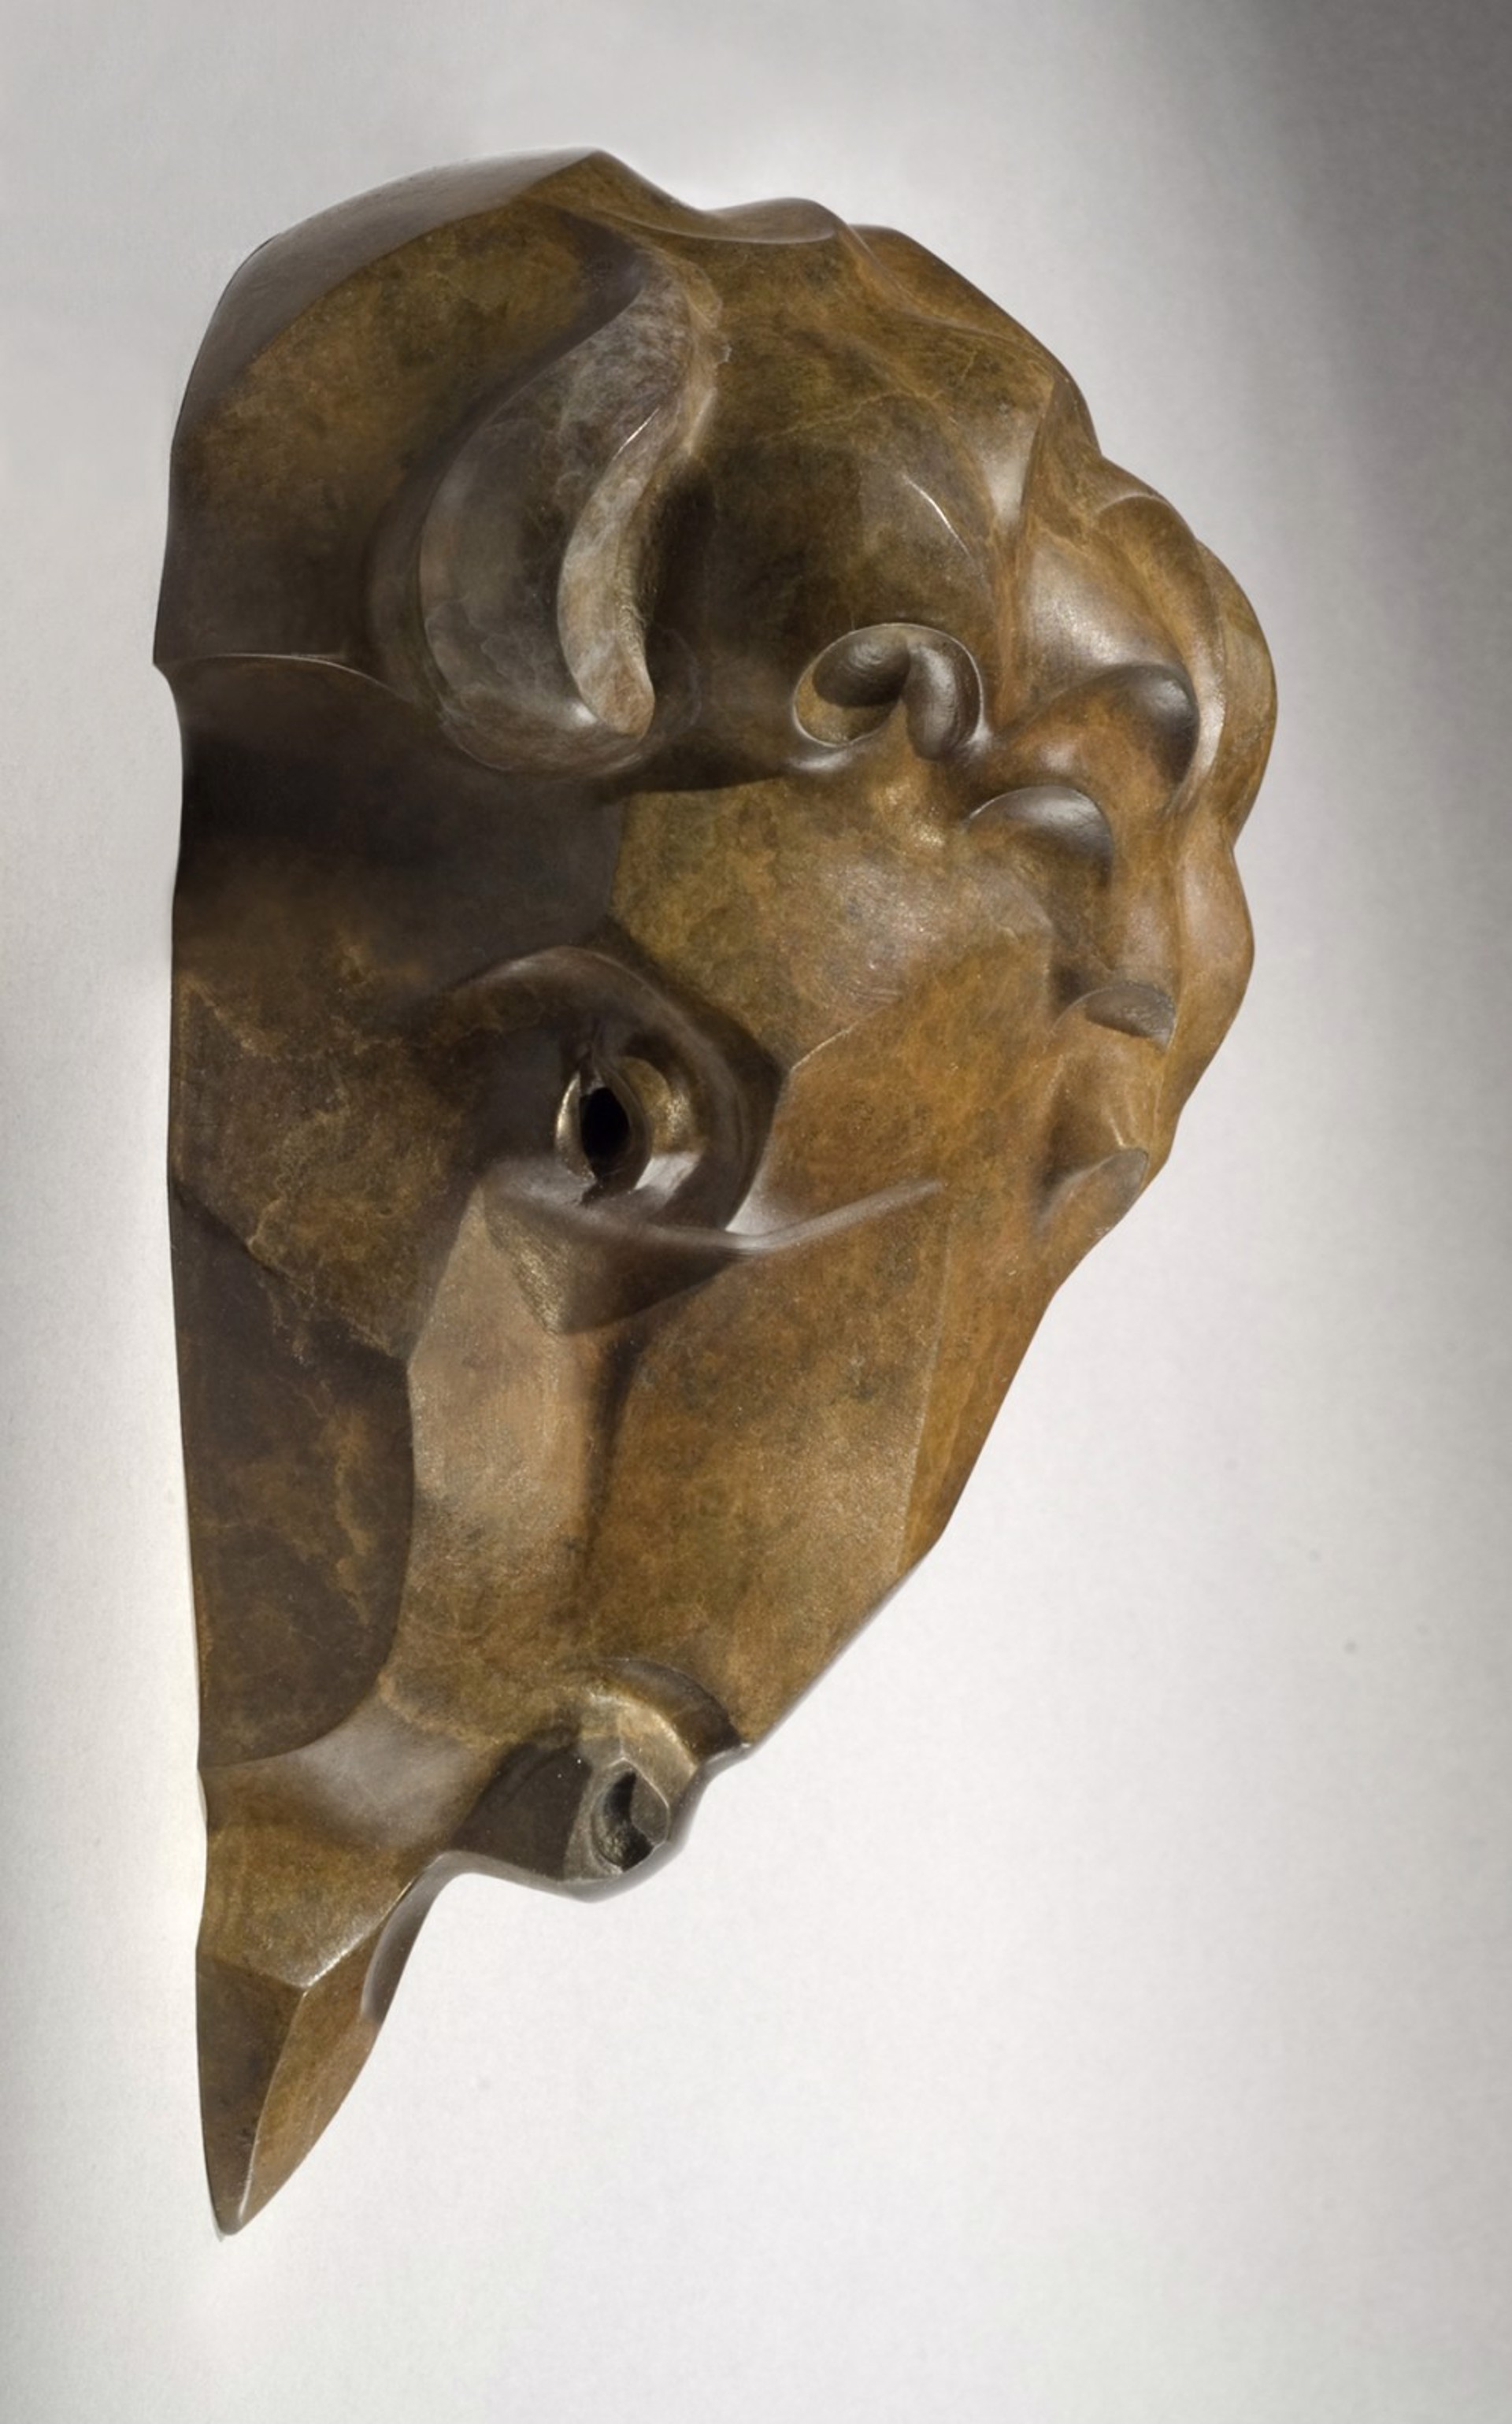 Bison Mask Maquette by Rosetta